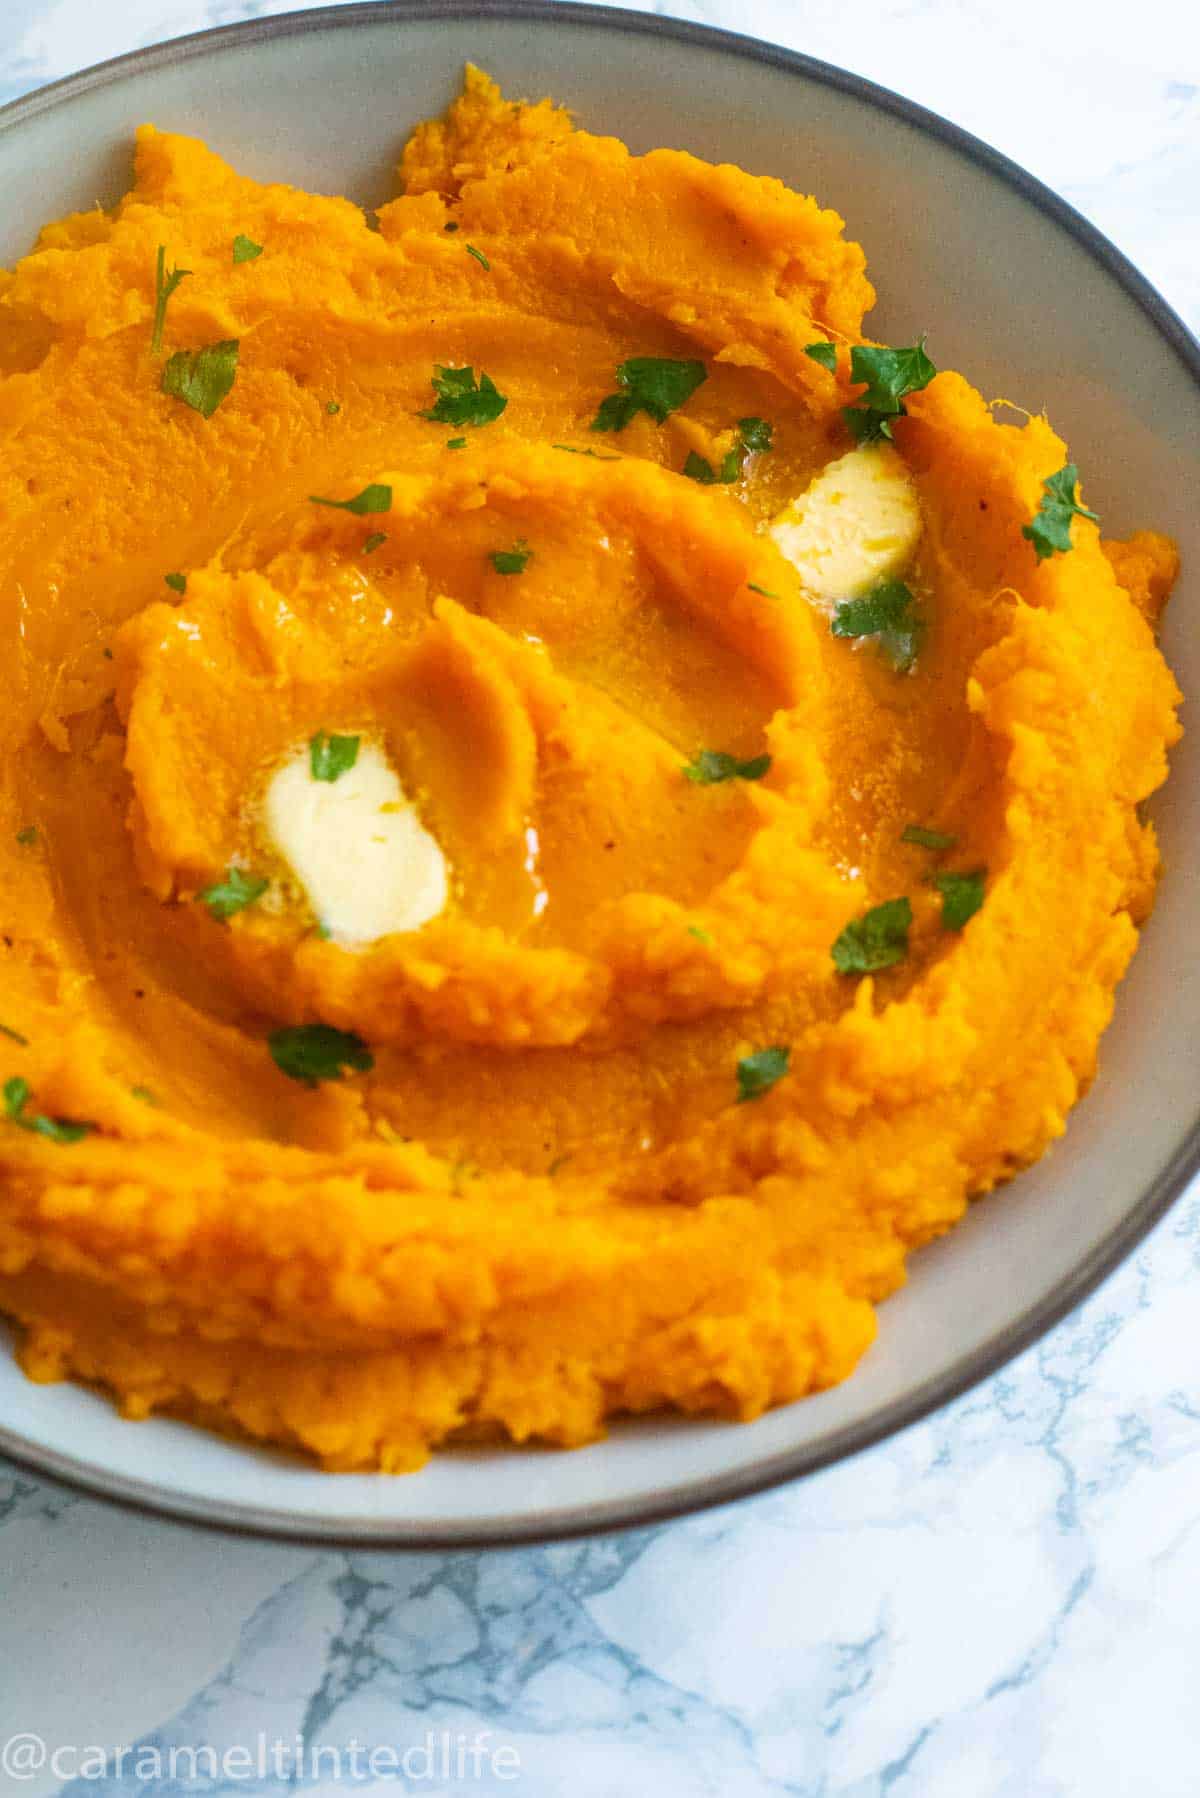 Mashed sweet potatoes in a bowl with melted butter and parsley garnish